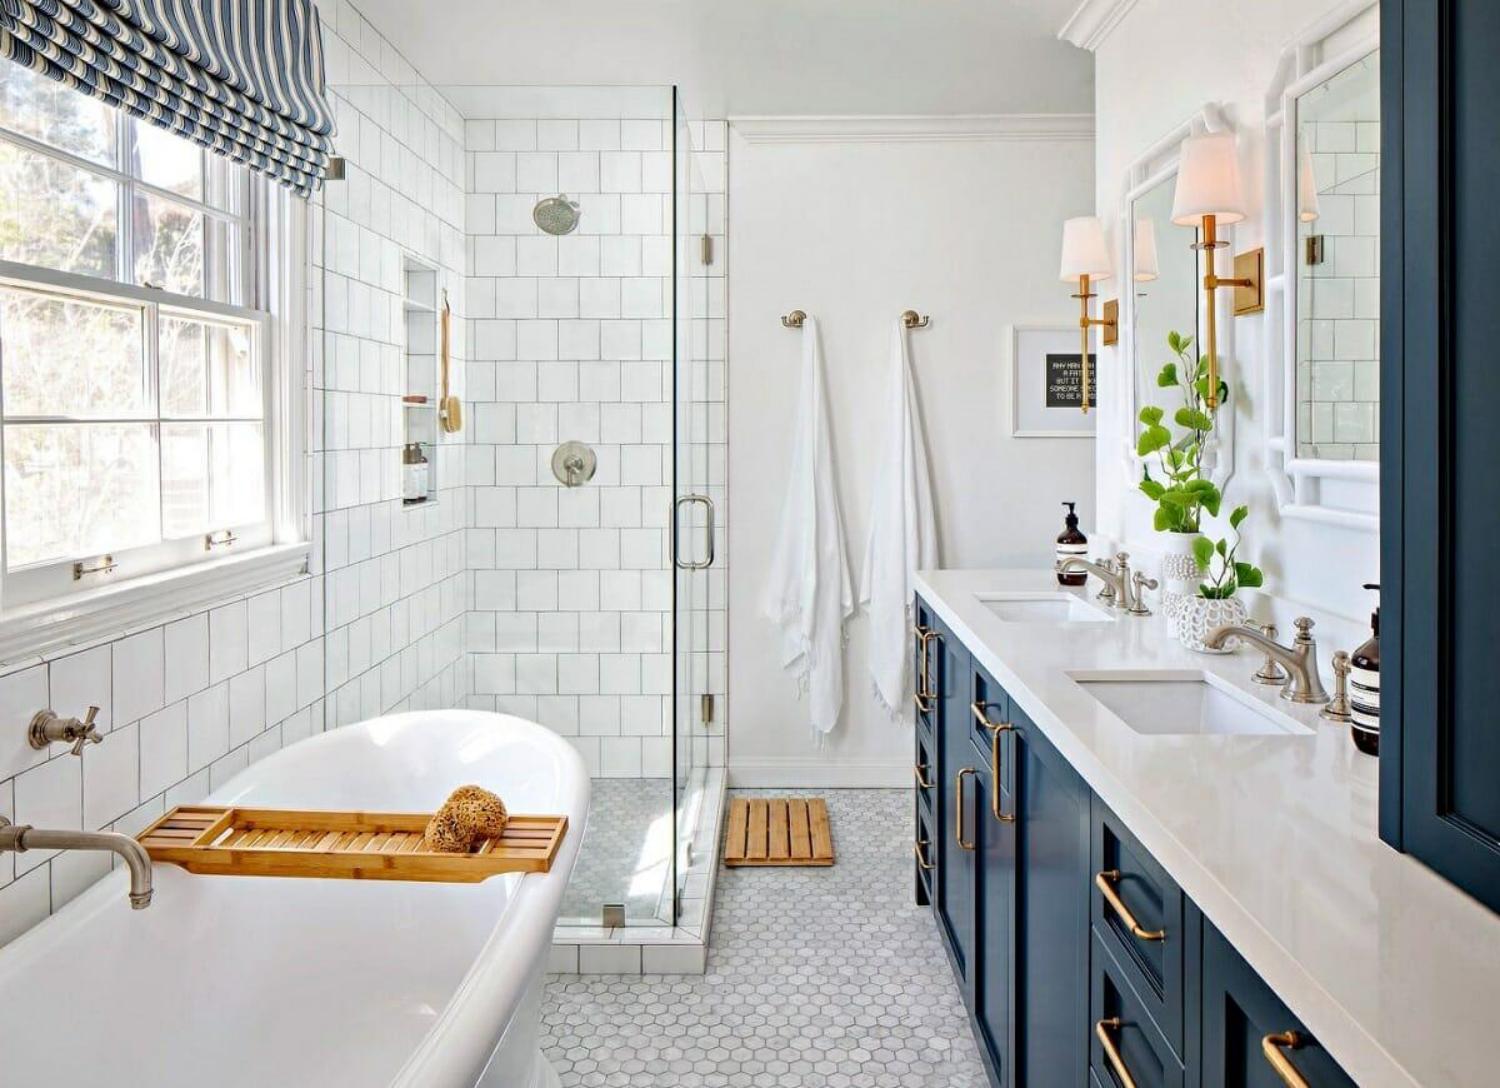 How to Budget for A Bathroom Remodel? - Blog - 2